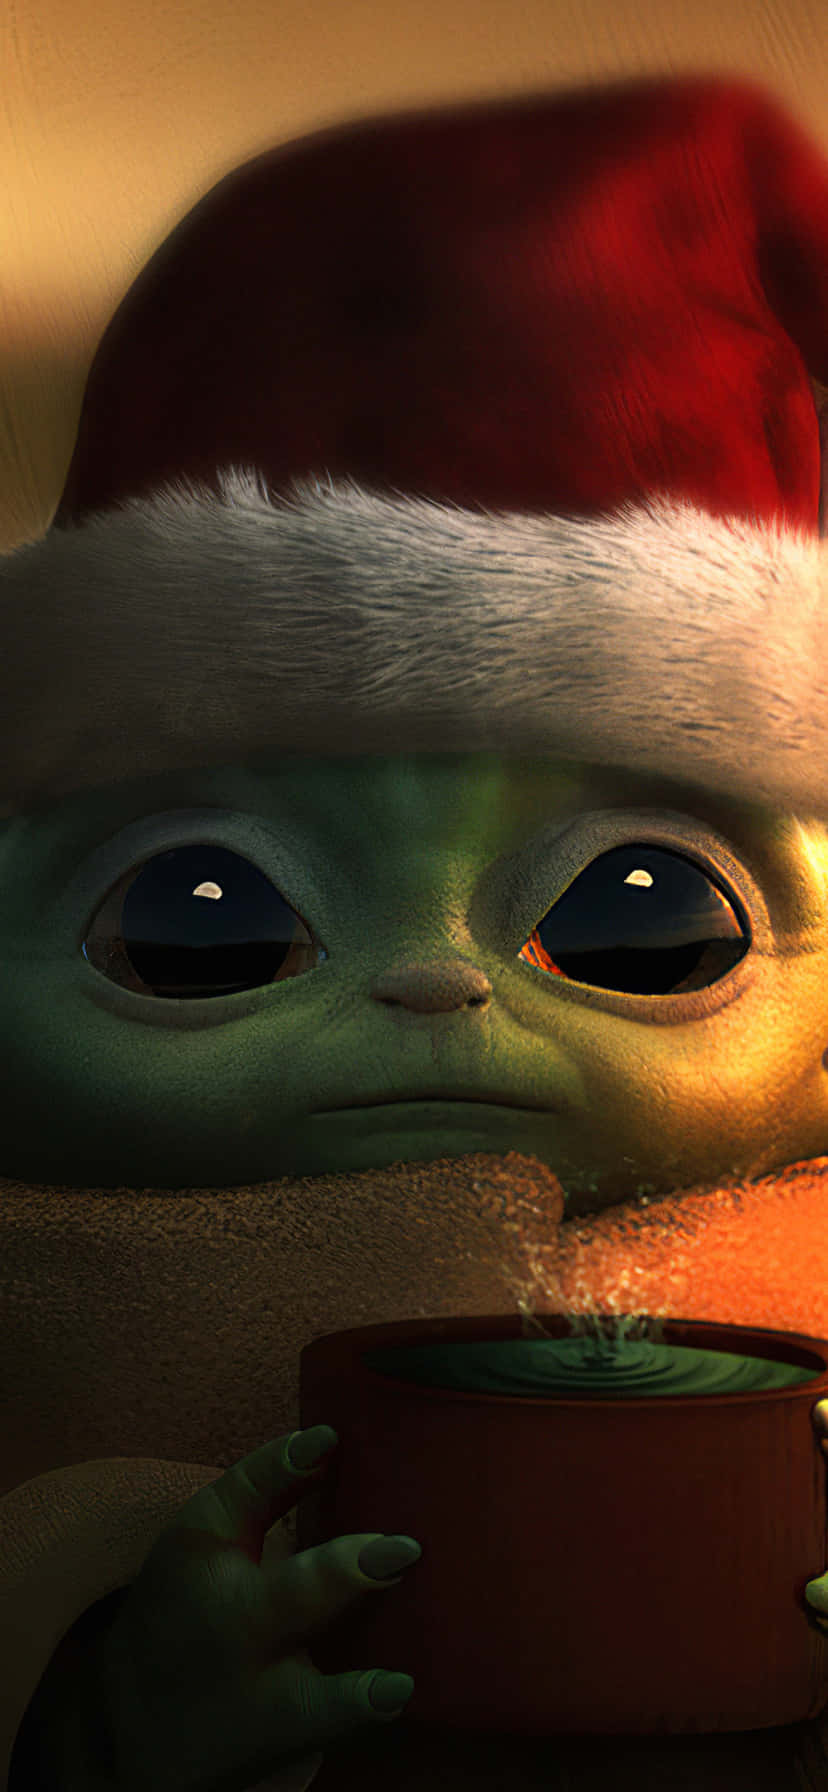 Celebrate The Holidays With Baby Yoda Wallpaper